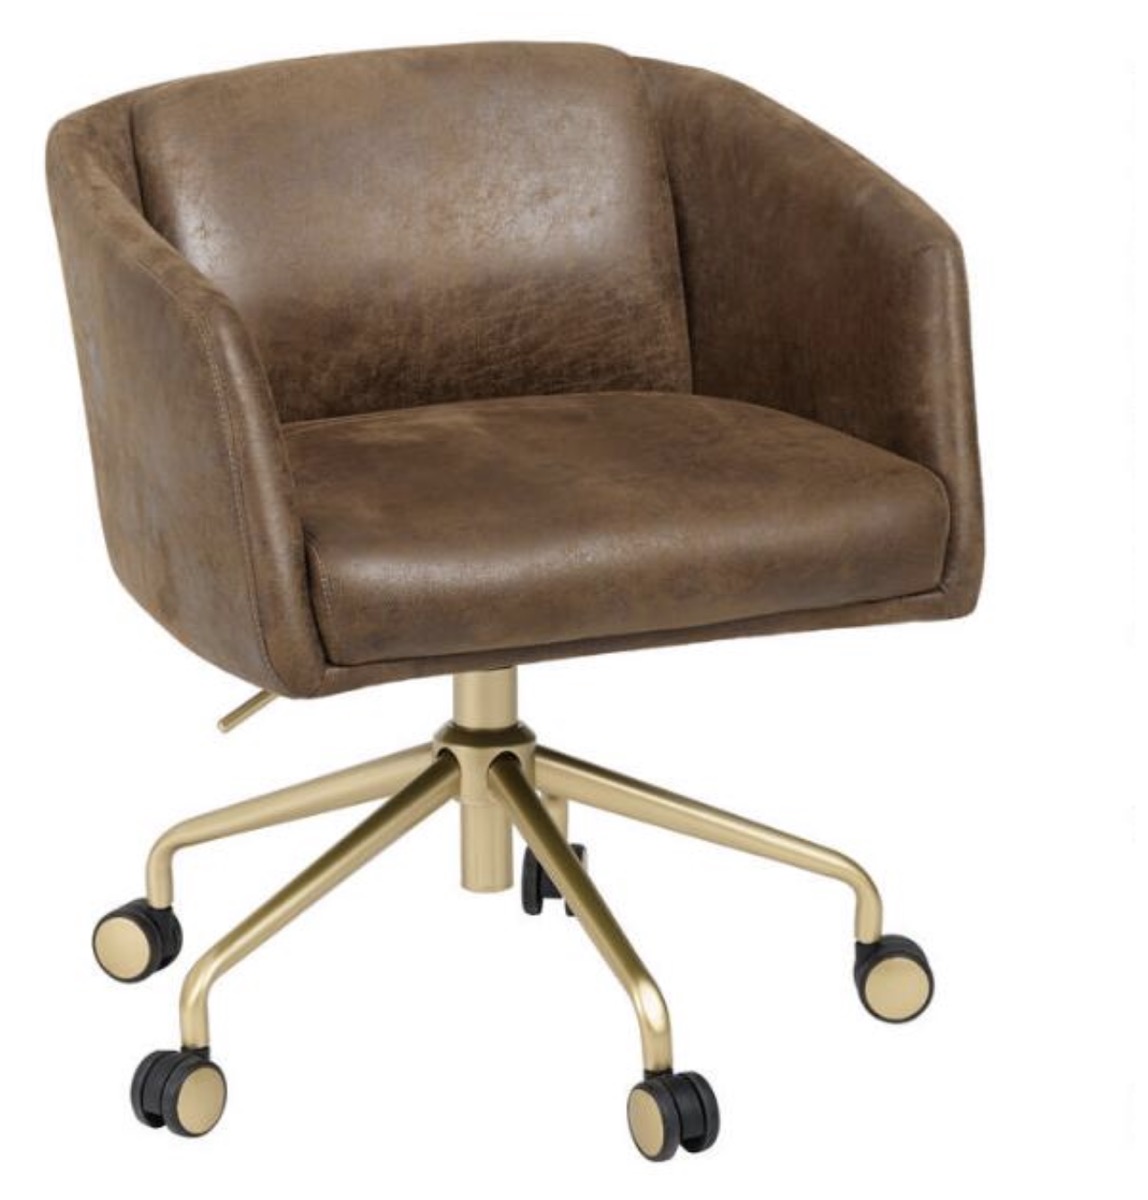 brown faux leather spinning desk chair from World Market